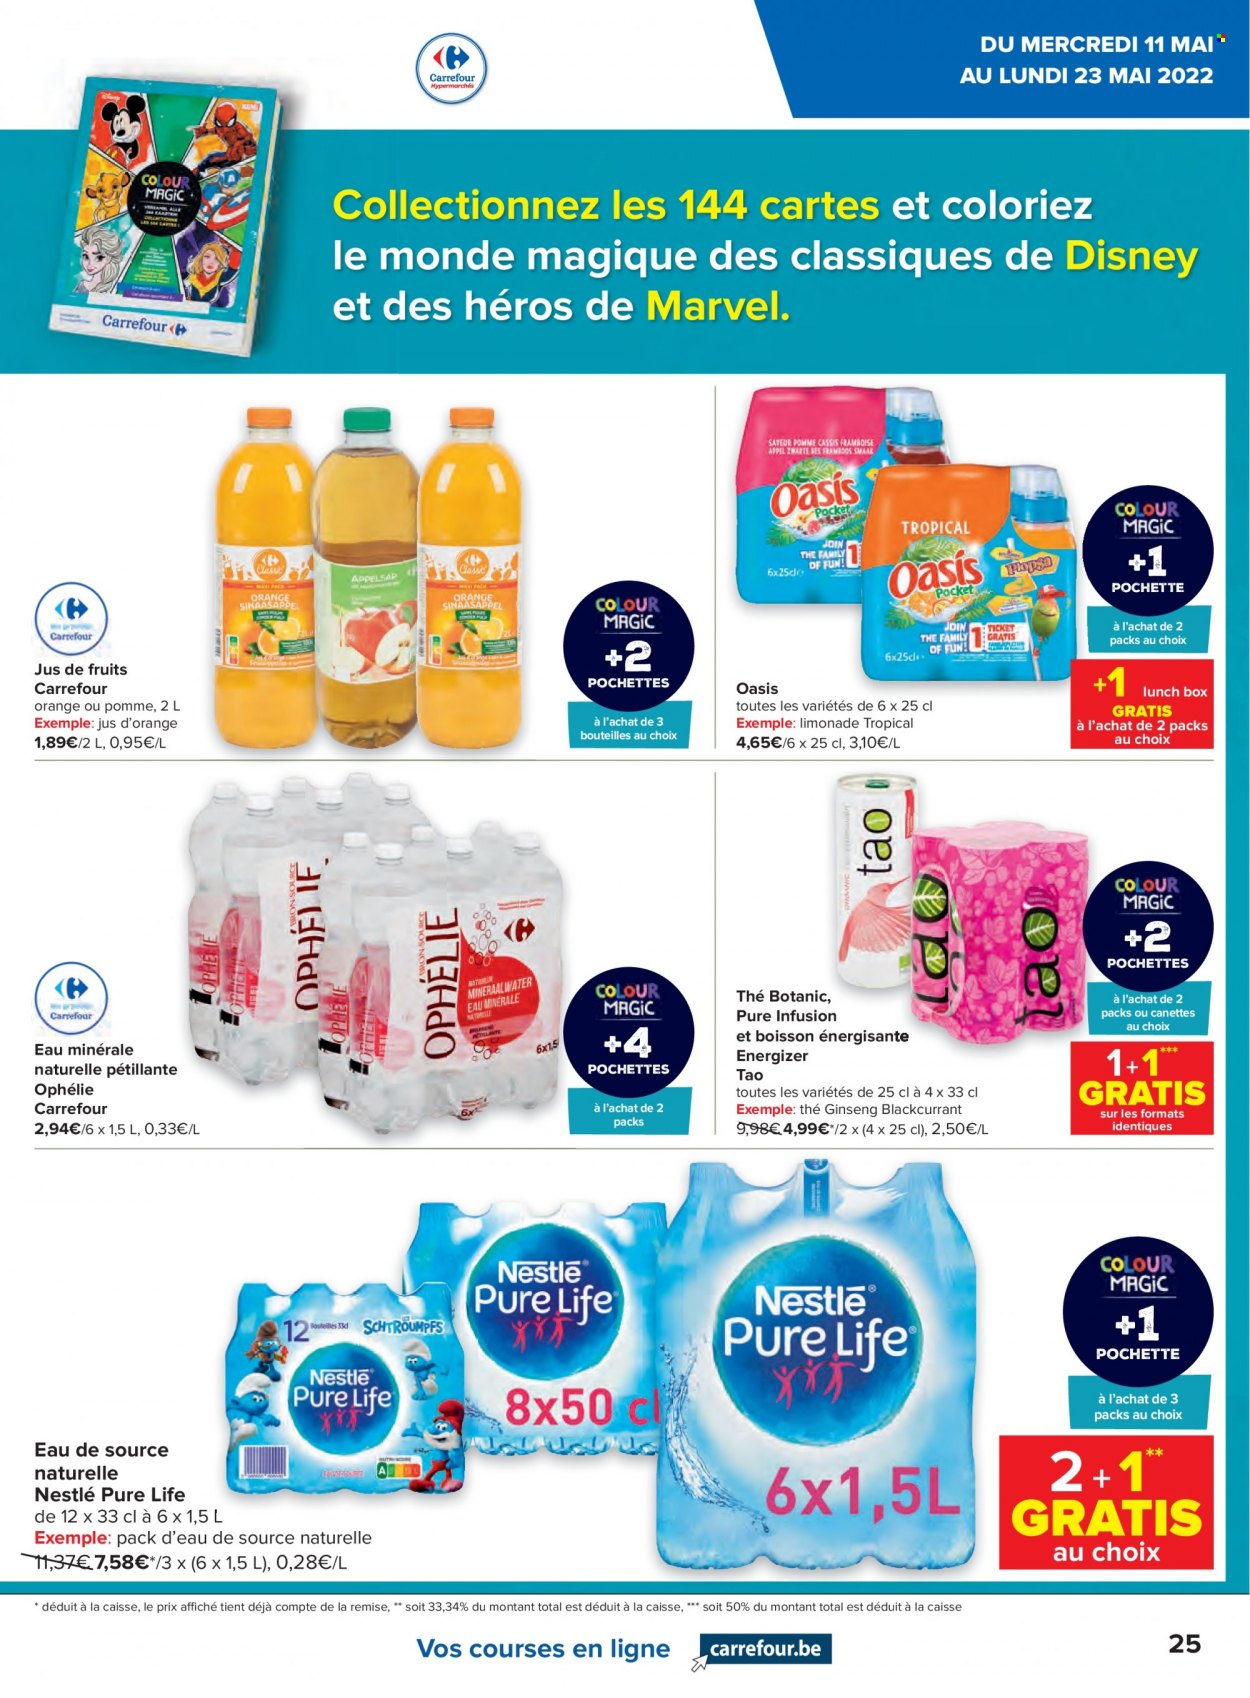 Catalogue Carrefour hypermarkt - 11.5.2022 - 23.5.2022. Page 25.